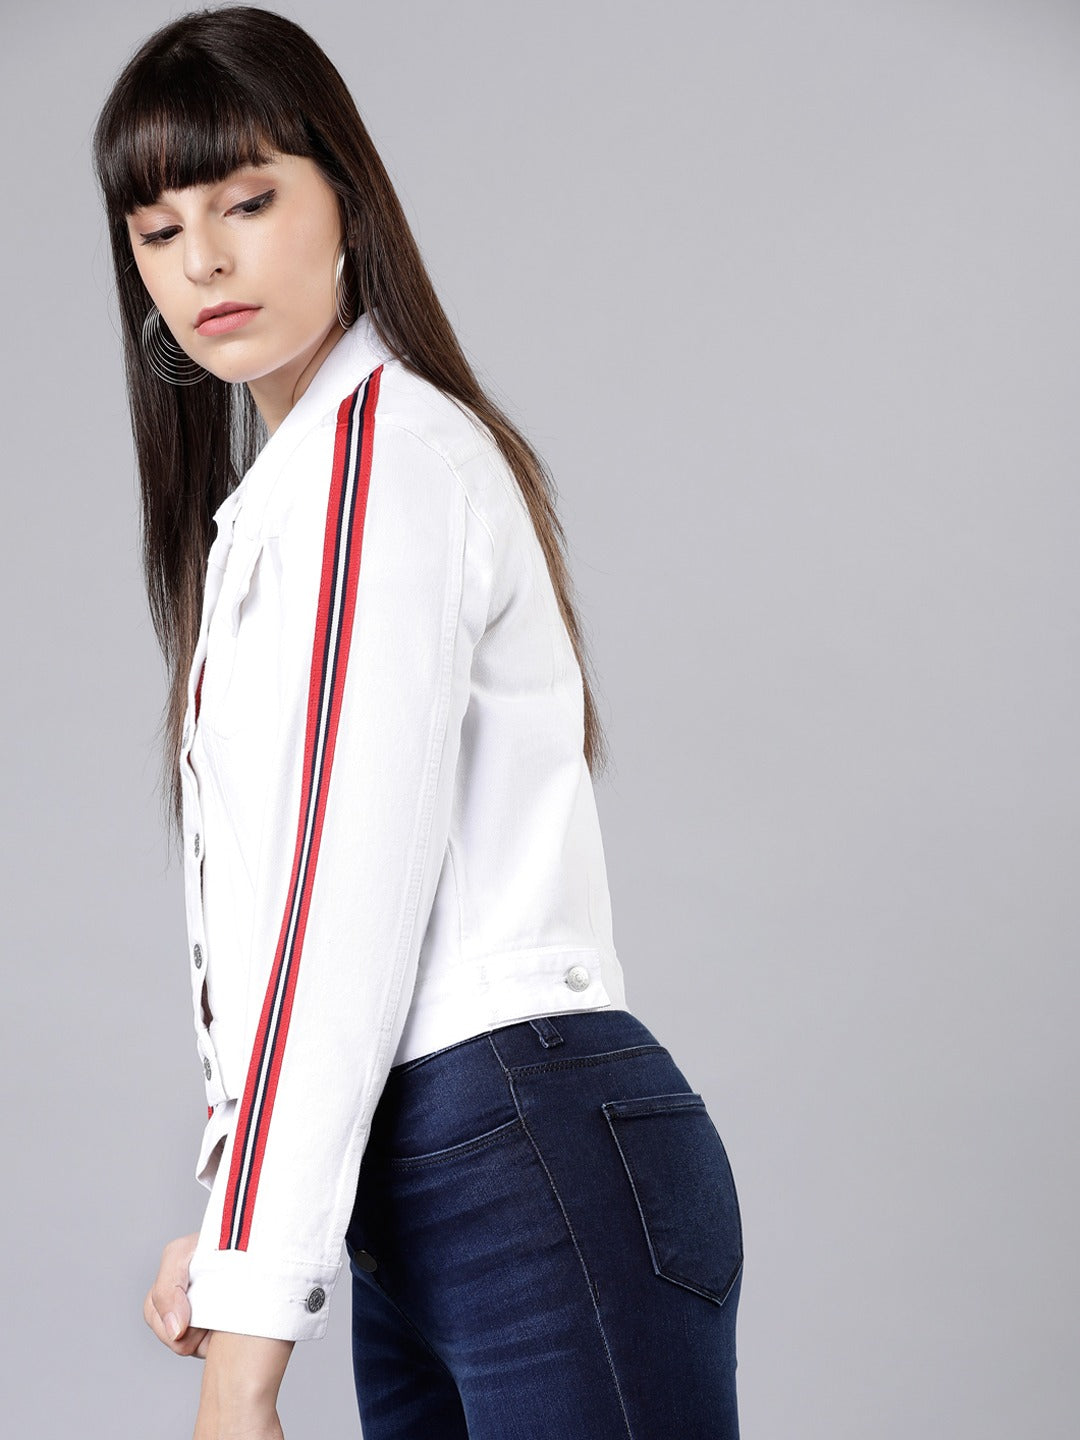 Stylish white women's jacket with red and blue striped trim, showcased against a gray background